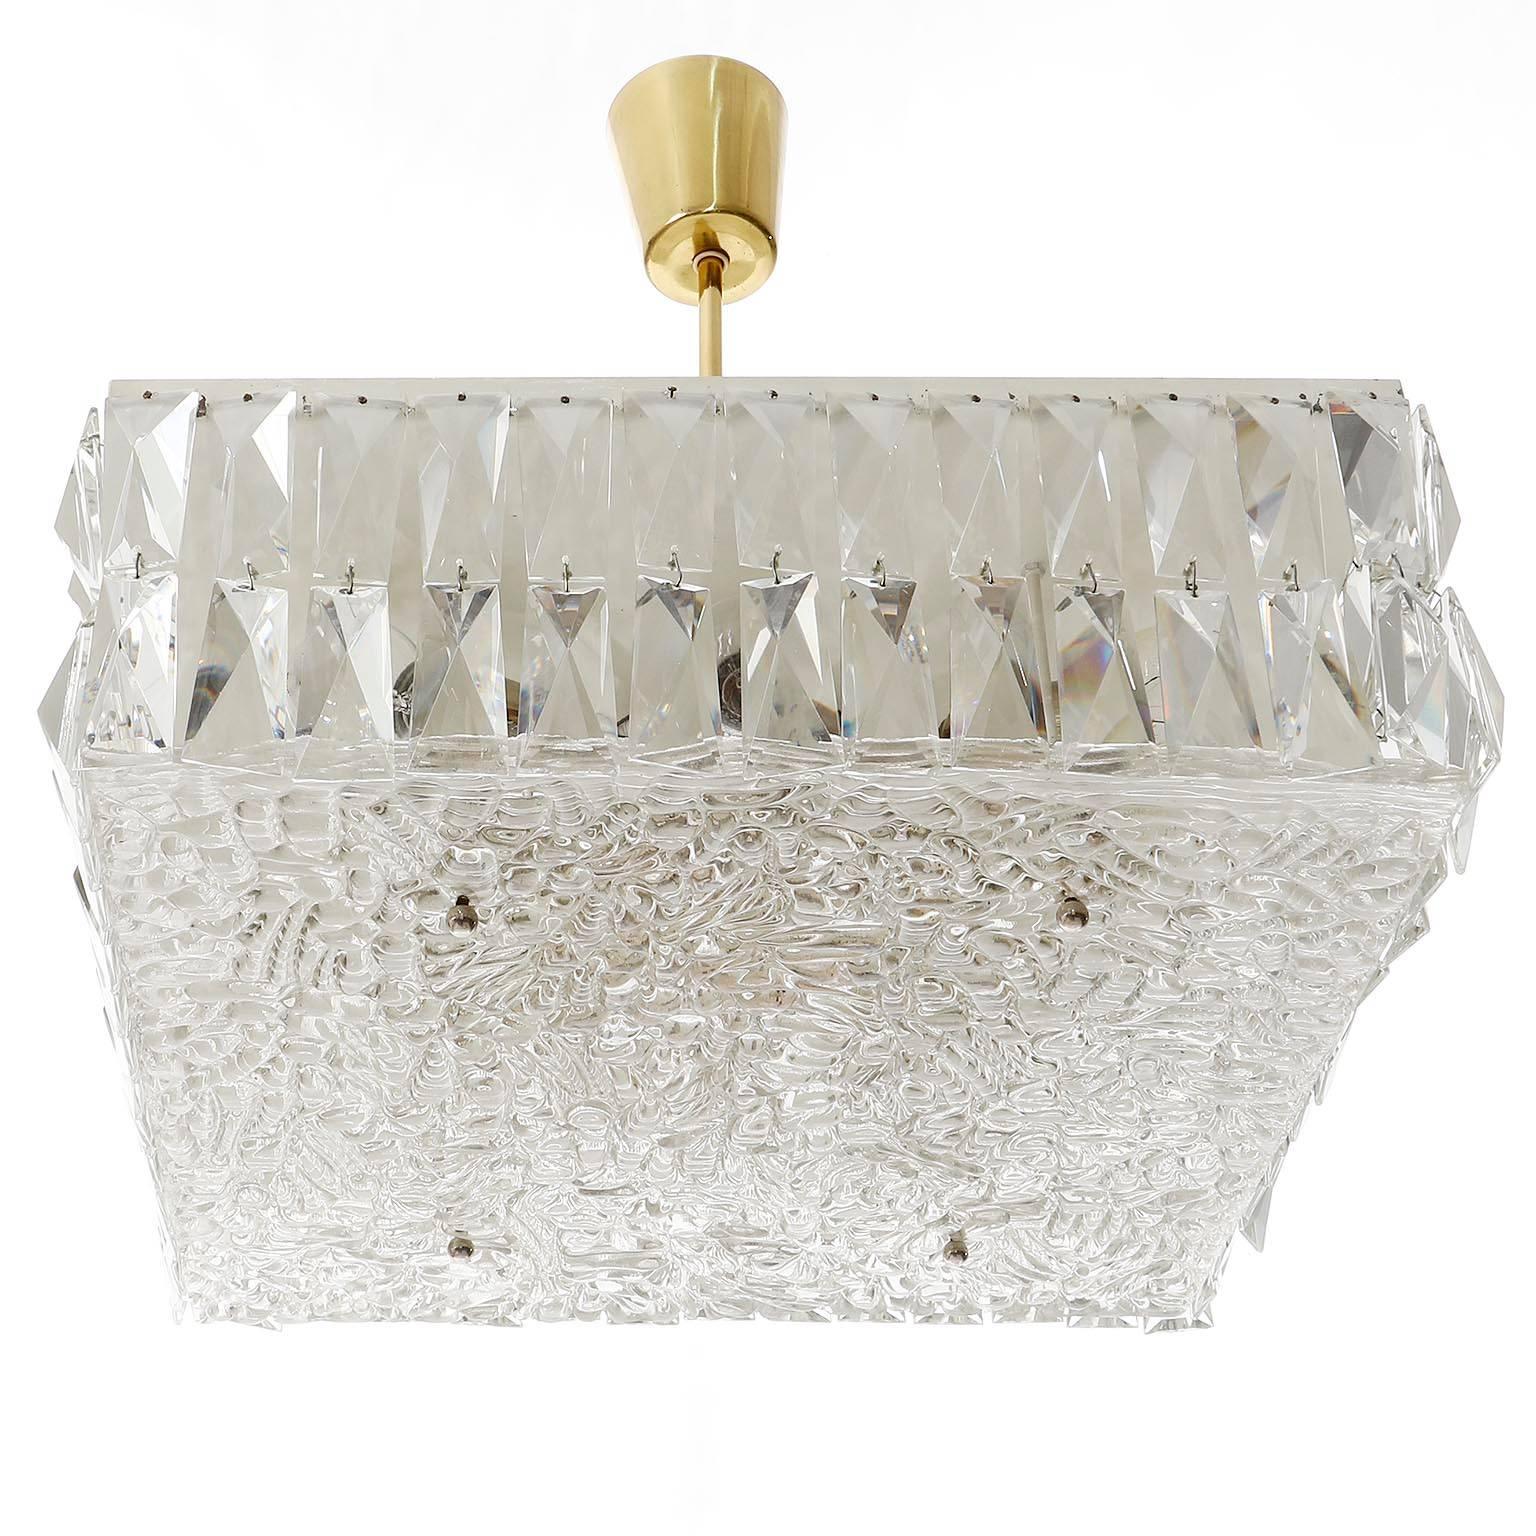 Square Kalmar Light Fixture, Textured and Crystal Glass, 1960s, One of Two (Emailliert)